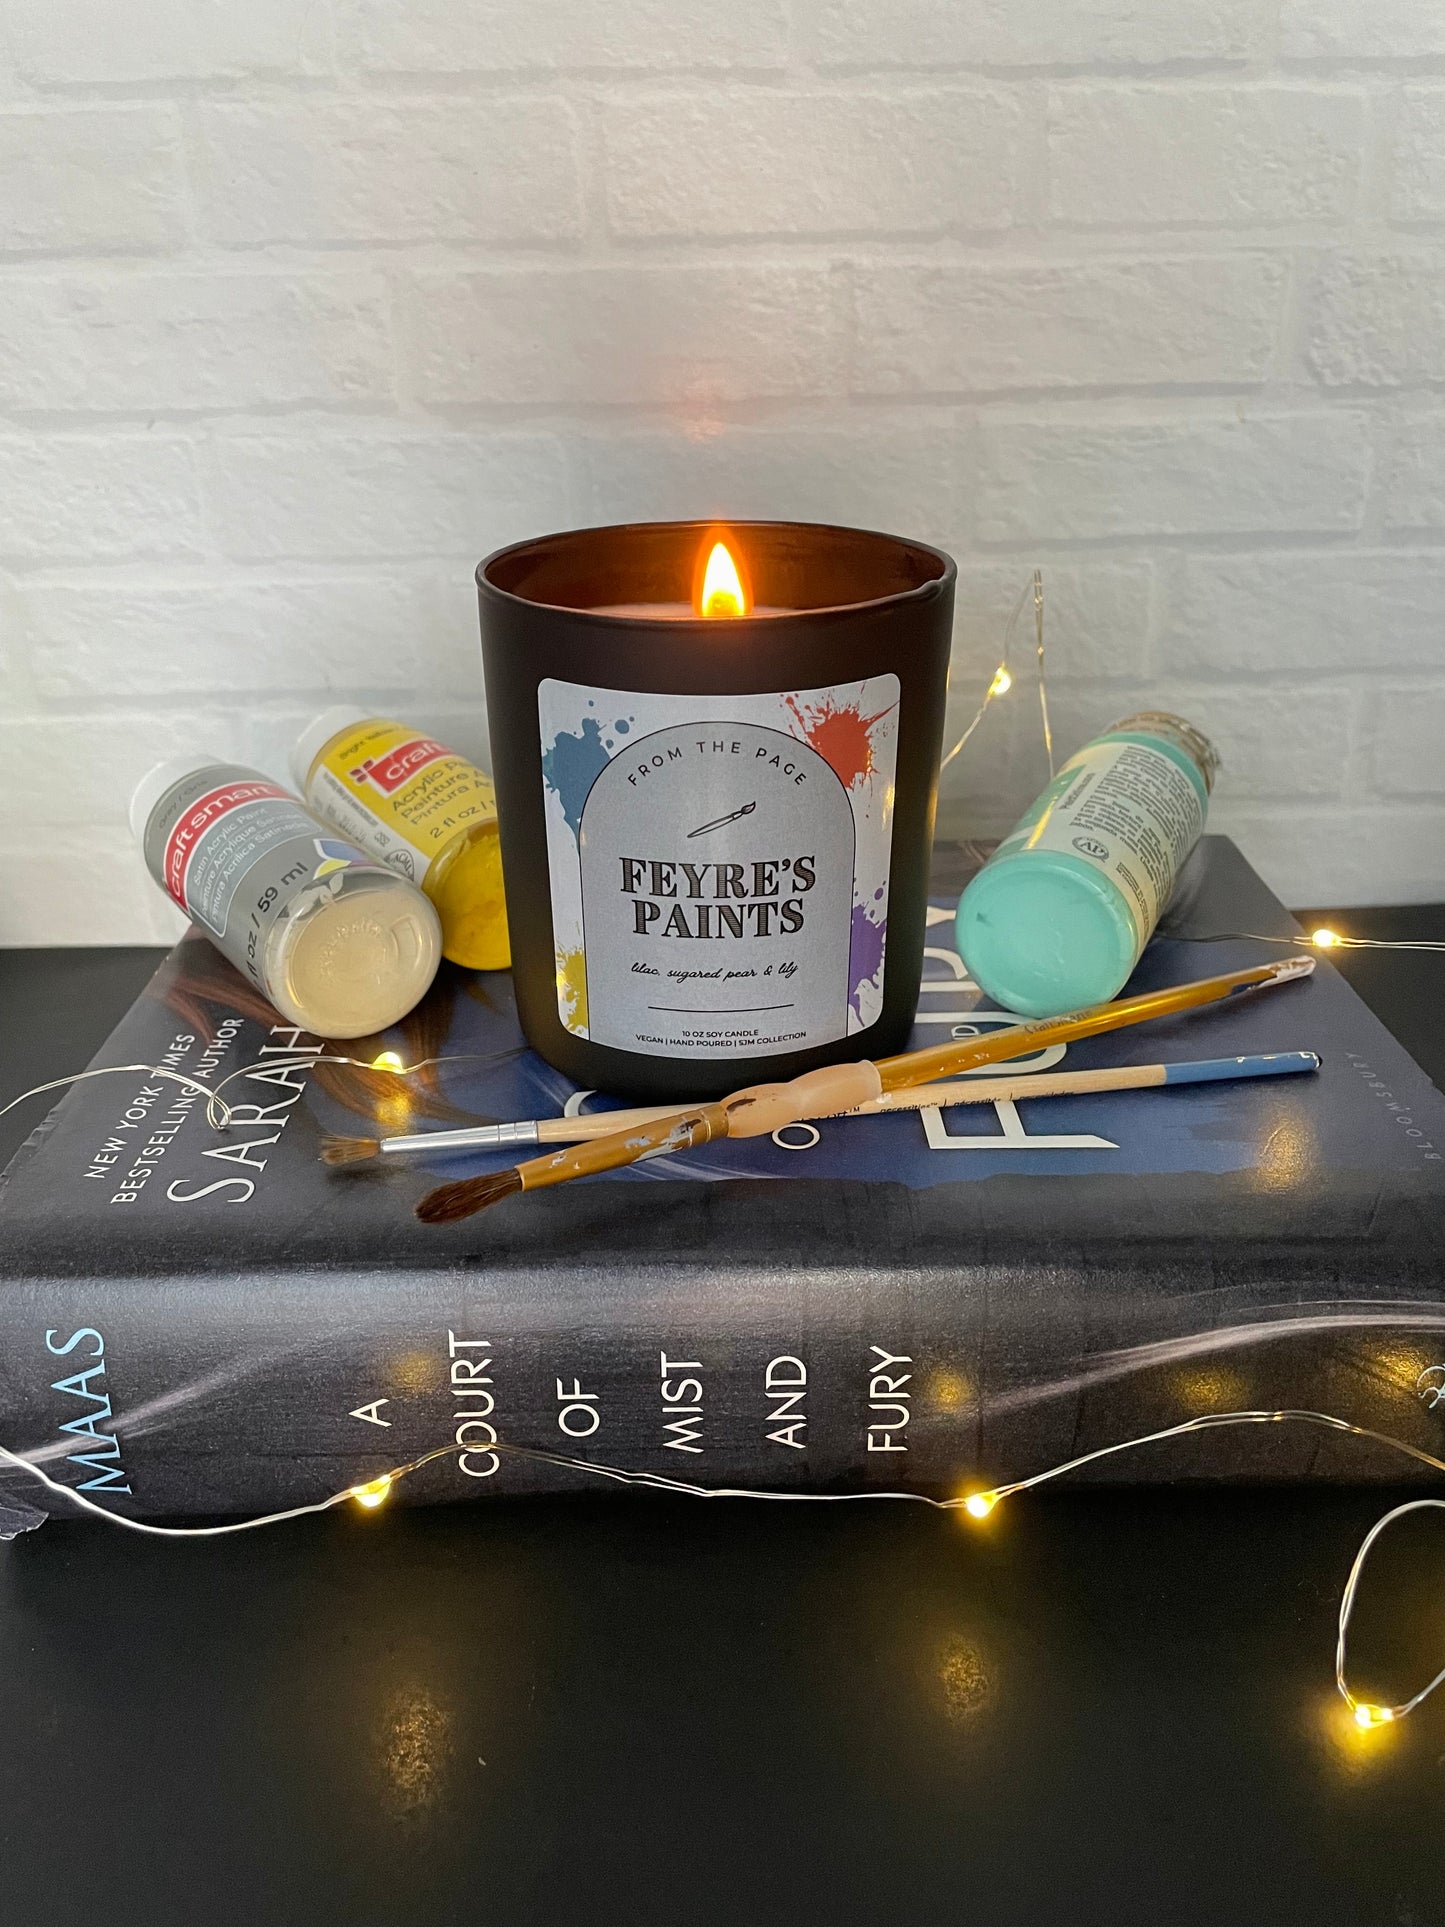 Feyre's Paints | Sarah J. Maas Officially Licensed Candles